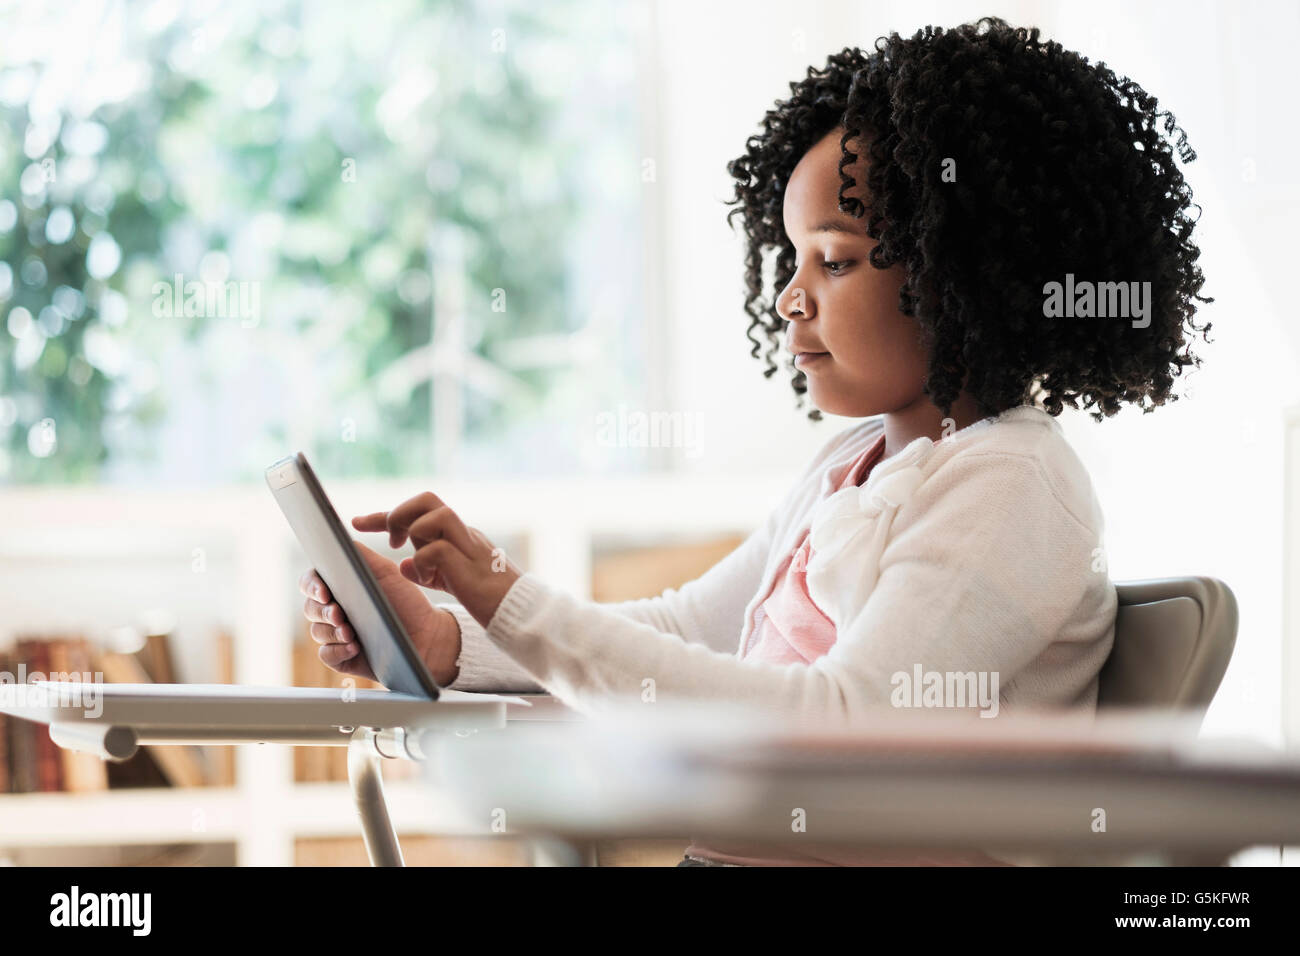 African American student using digital tablet in classroom Stock Photo